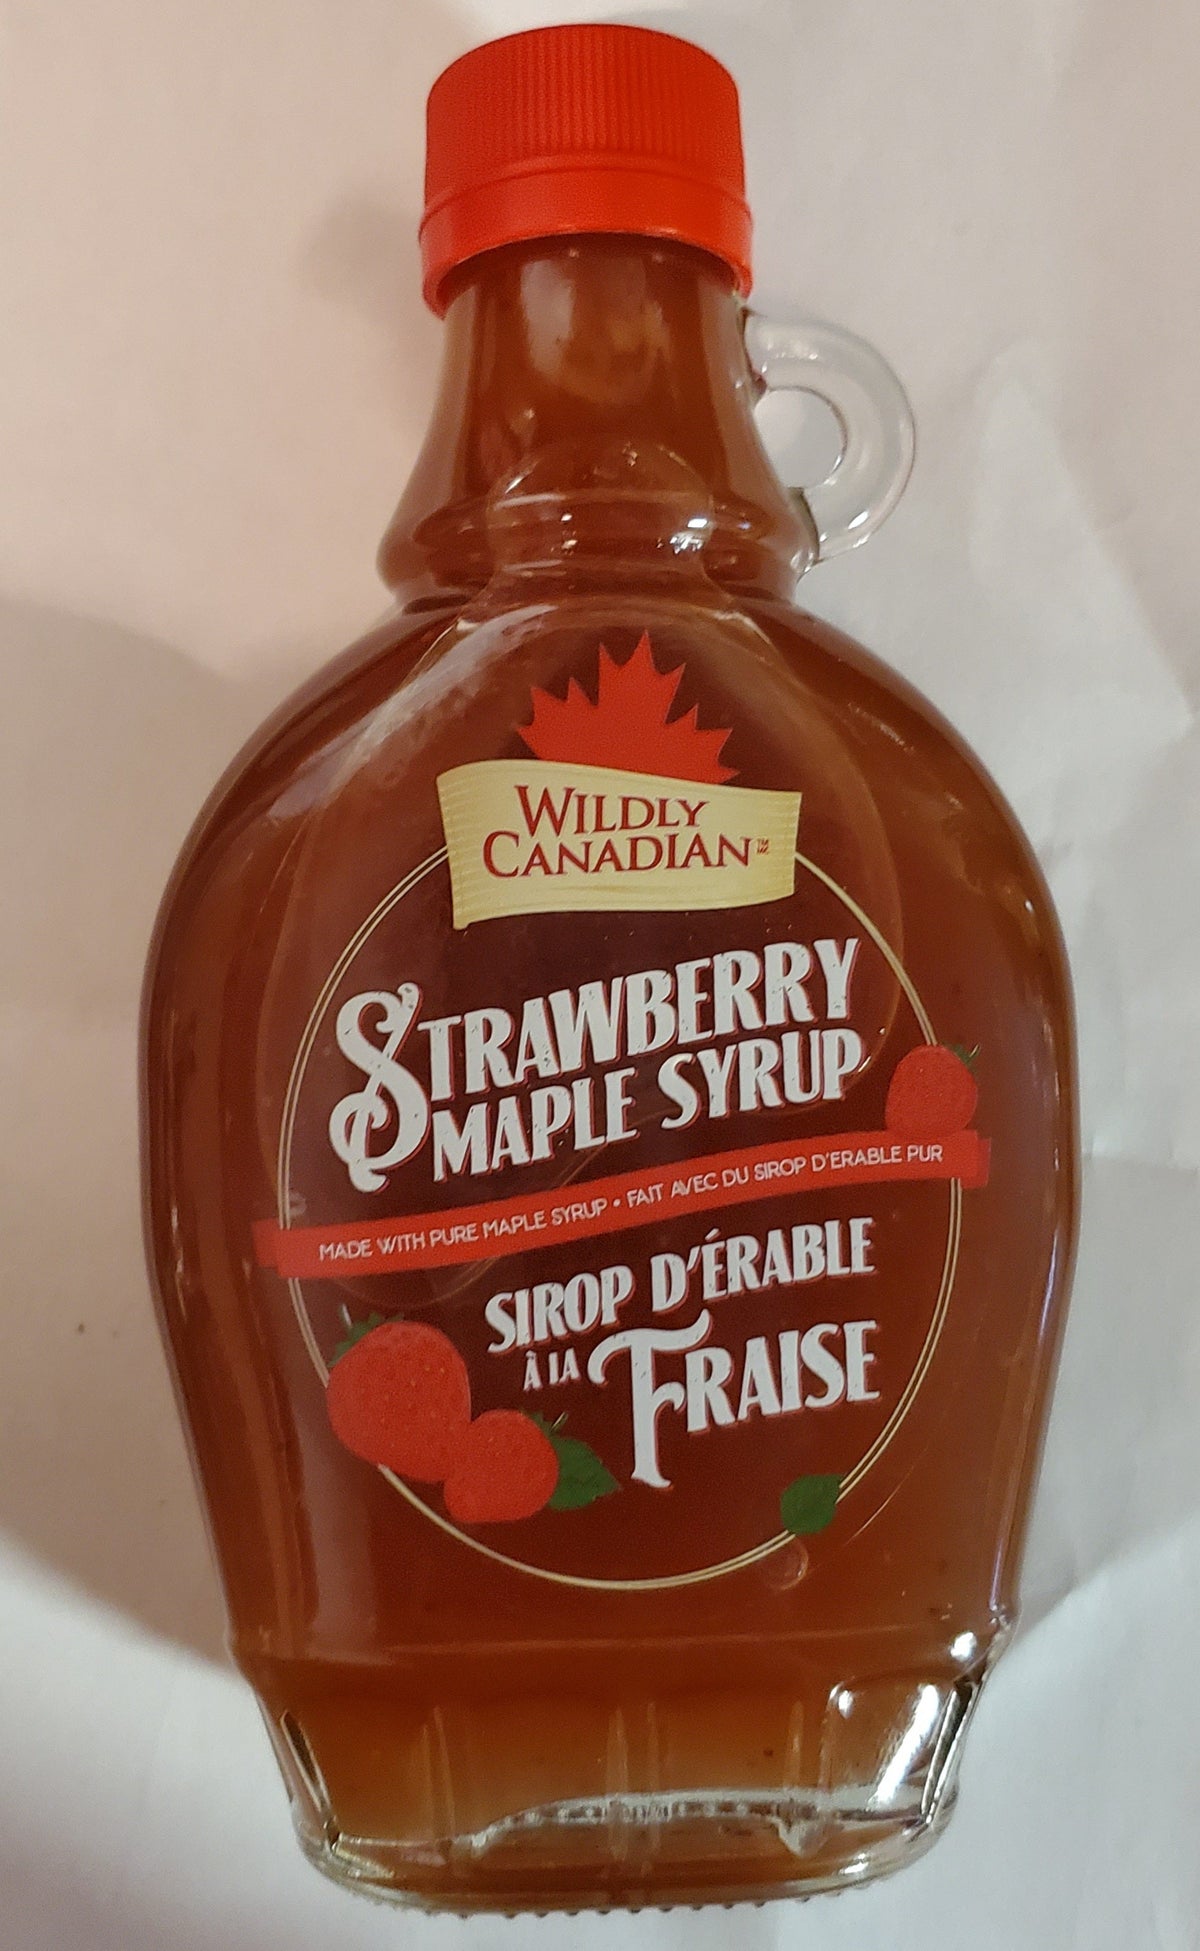 Strawberry Maple Syrup (250ml)